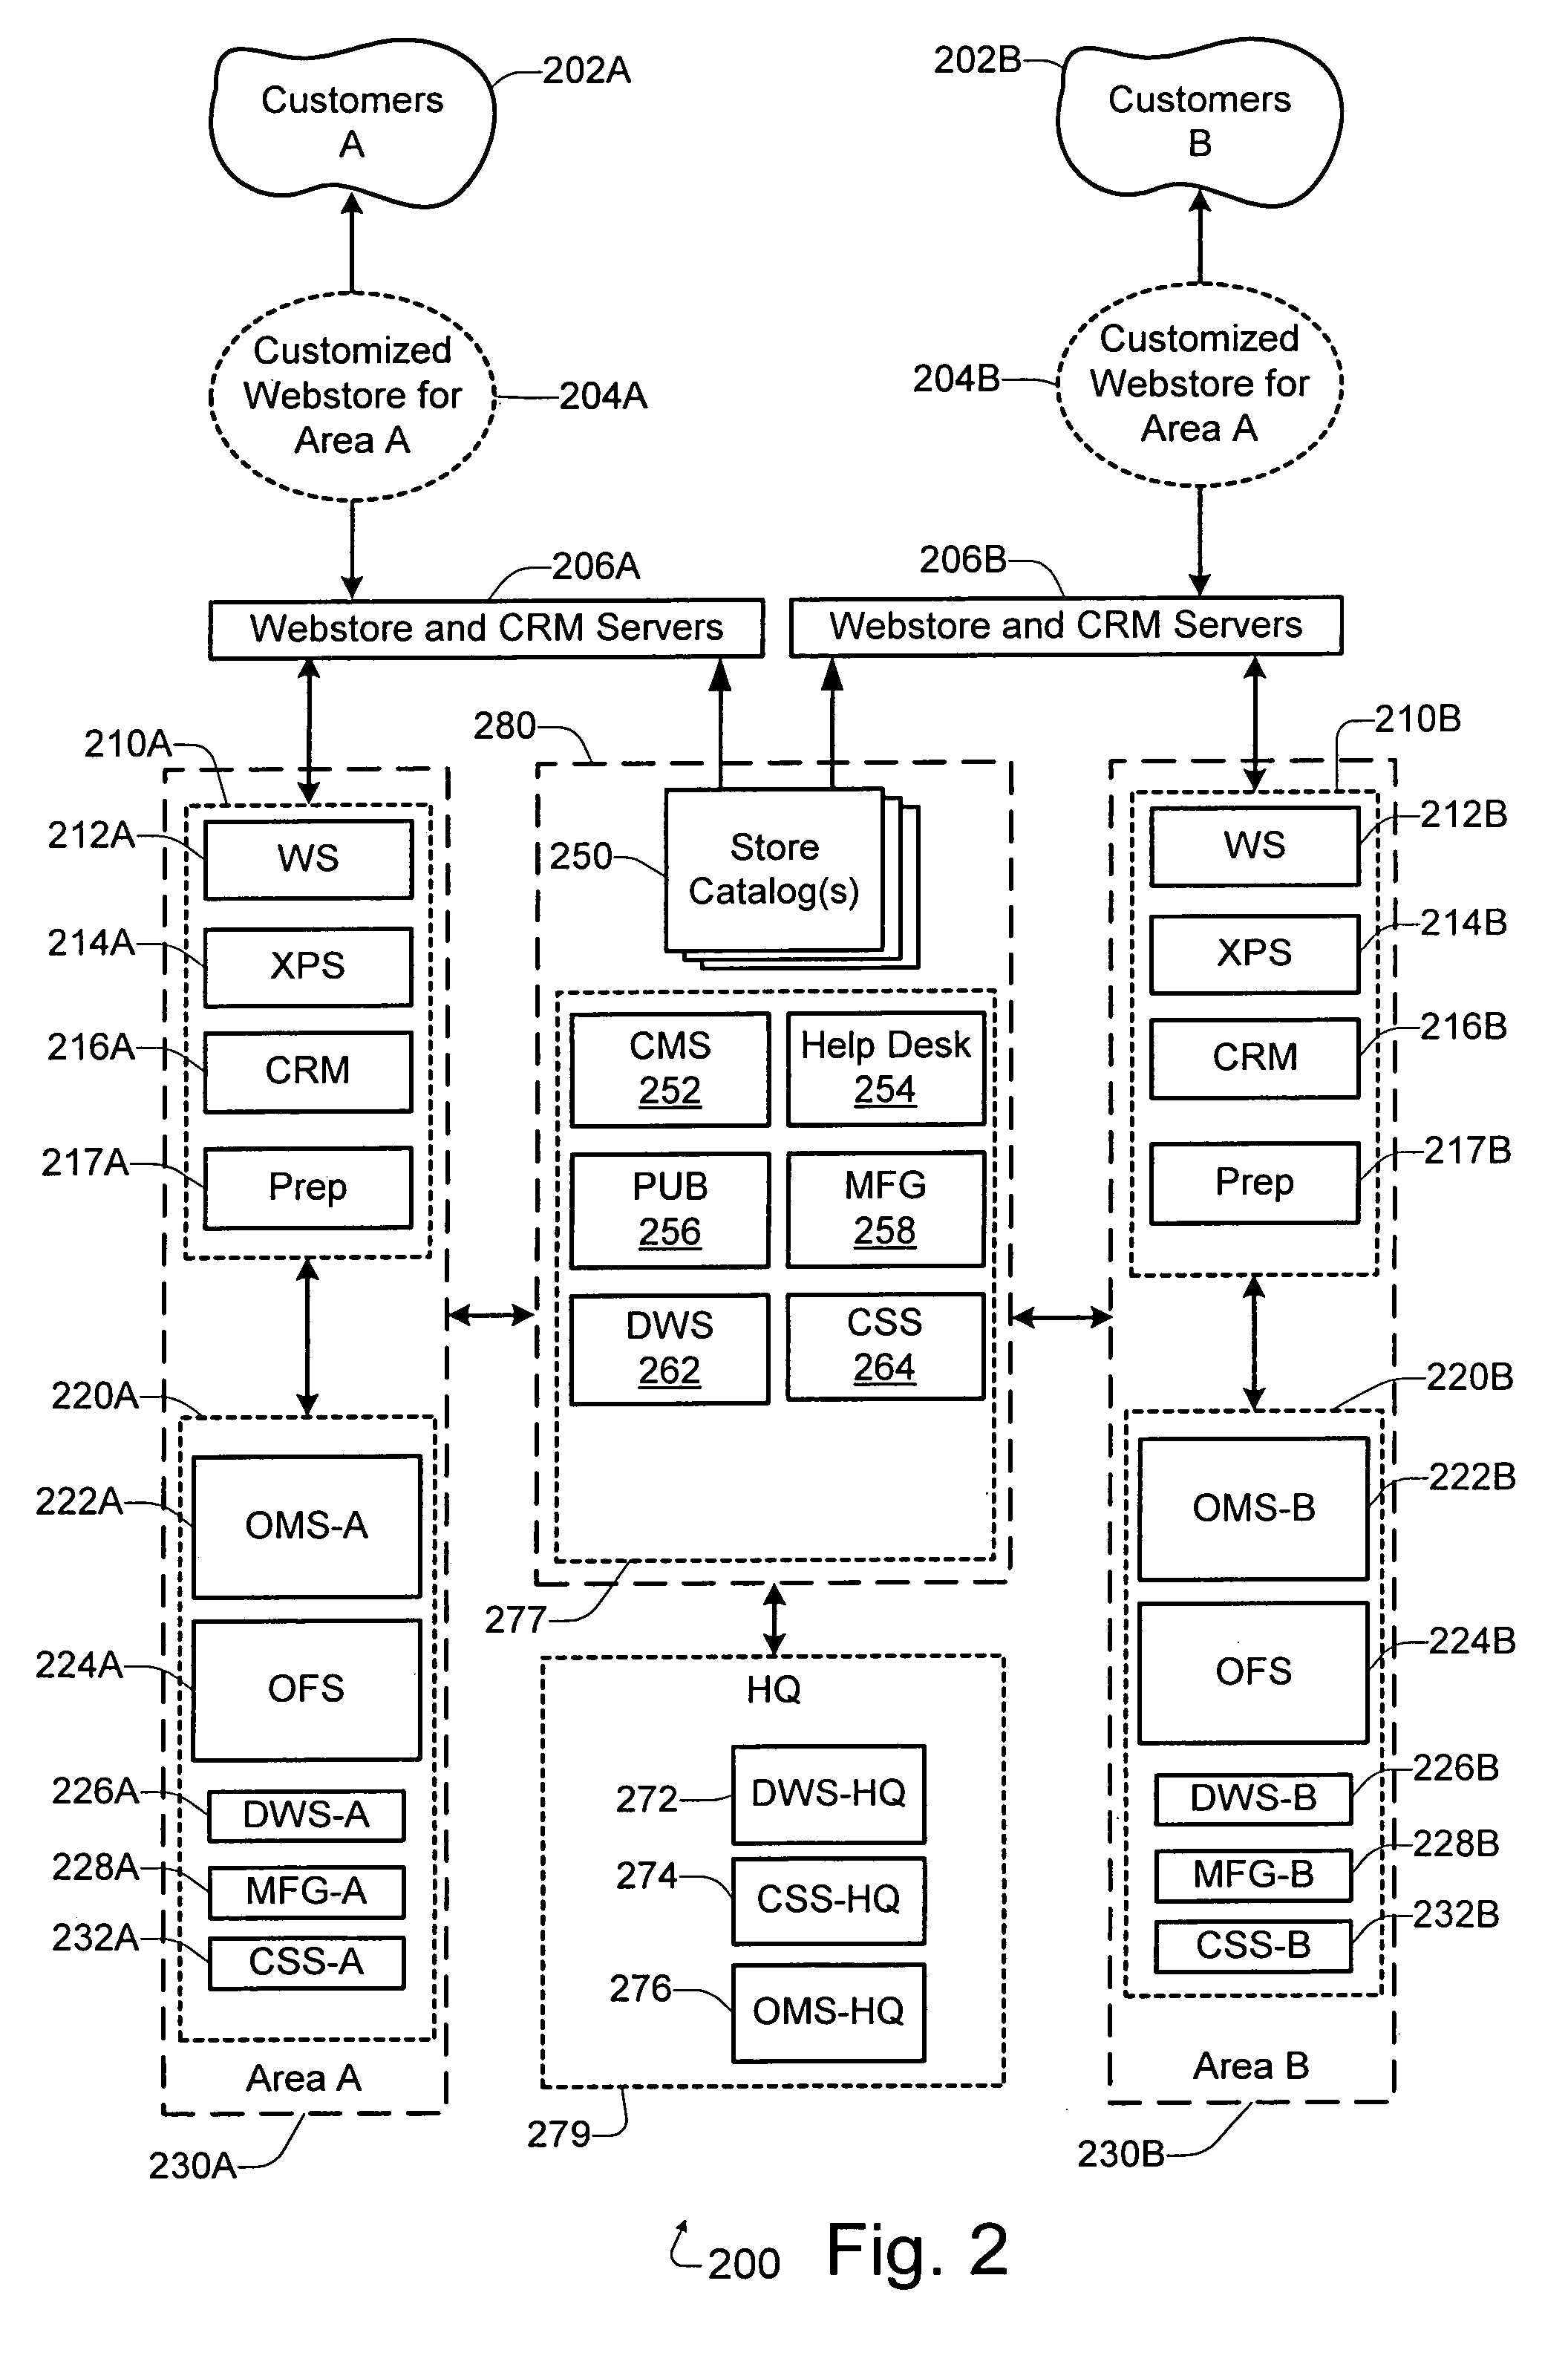 Integrated system for ordering, fulfillment, and delivery of consumer products using a data network